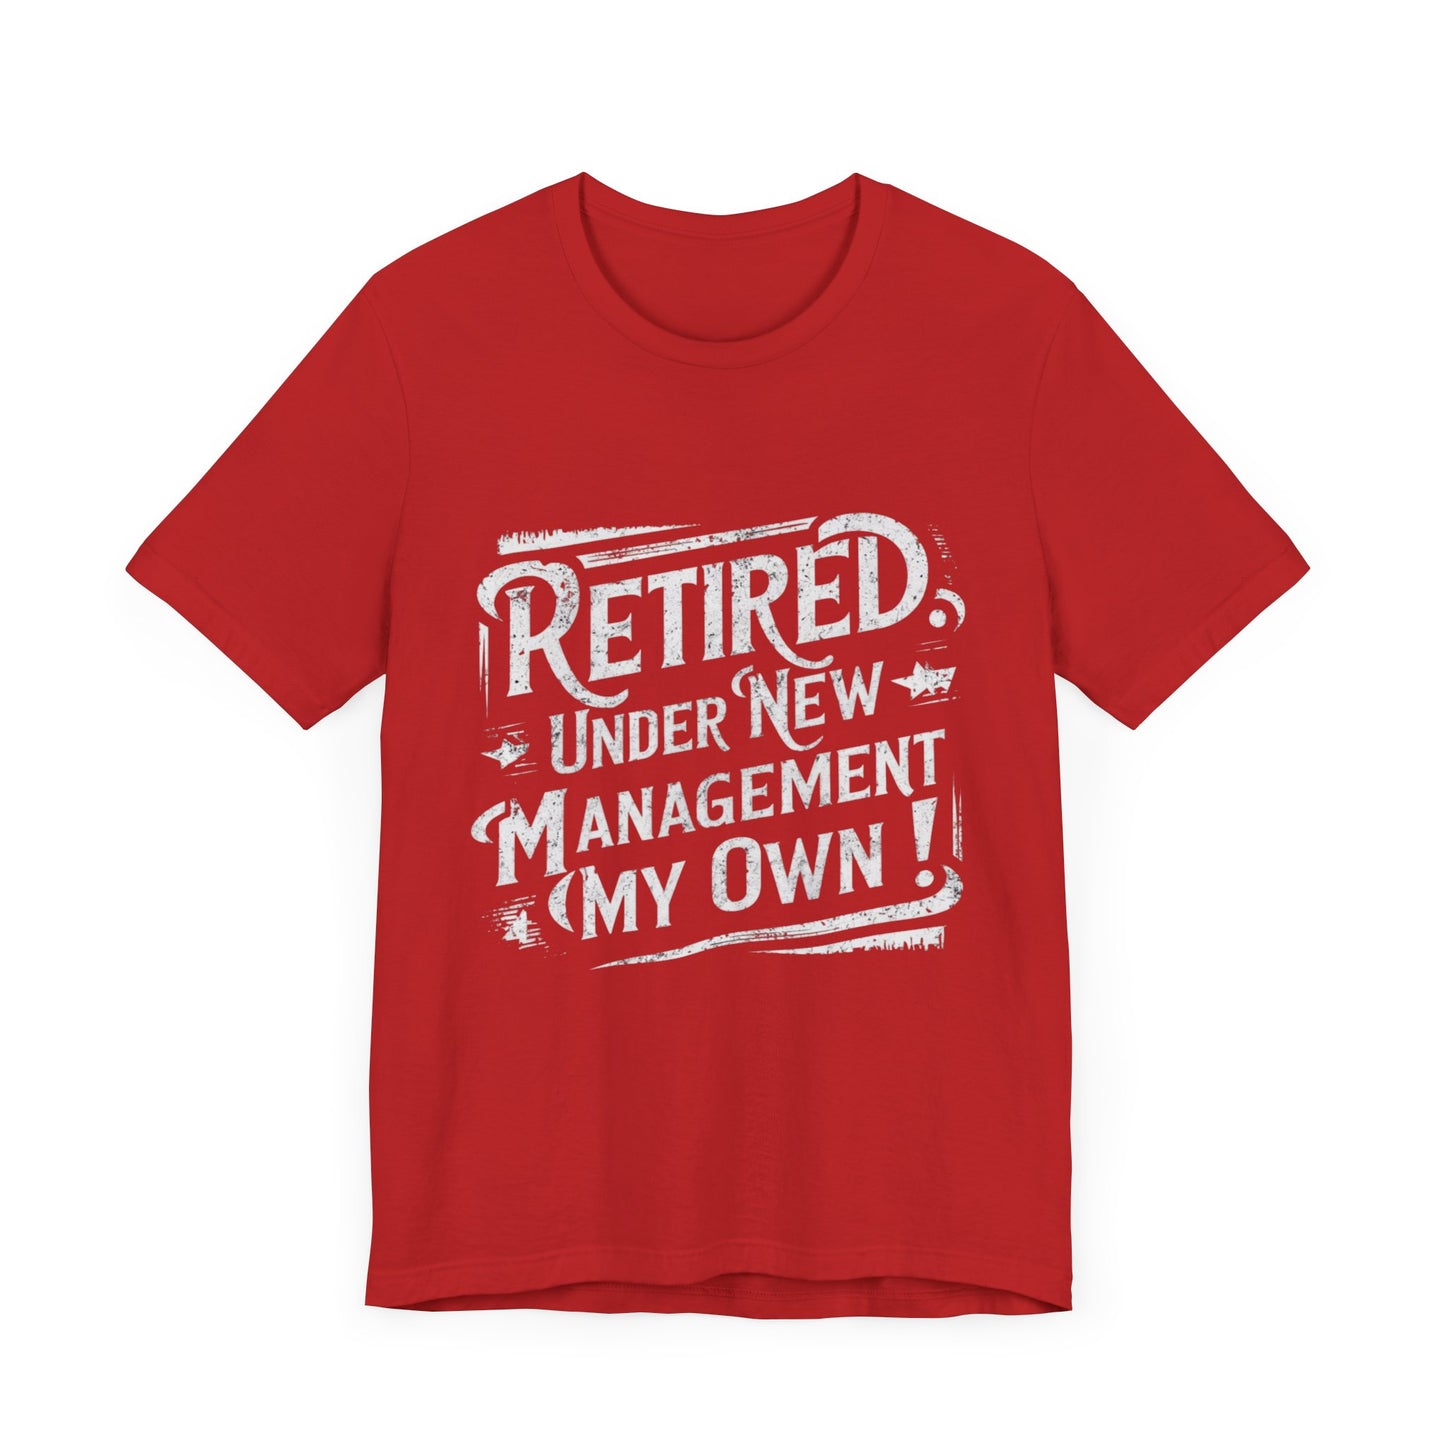 Retired Under New Management My Own Jersey Short Sleeve Tee For Men